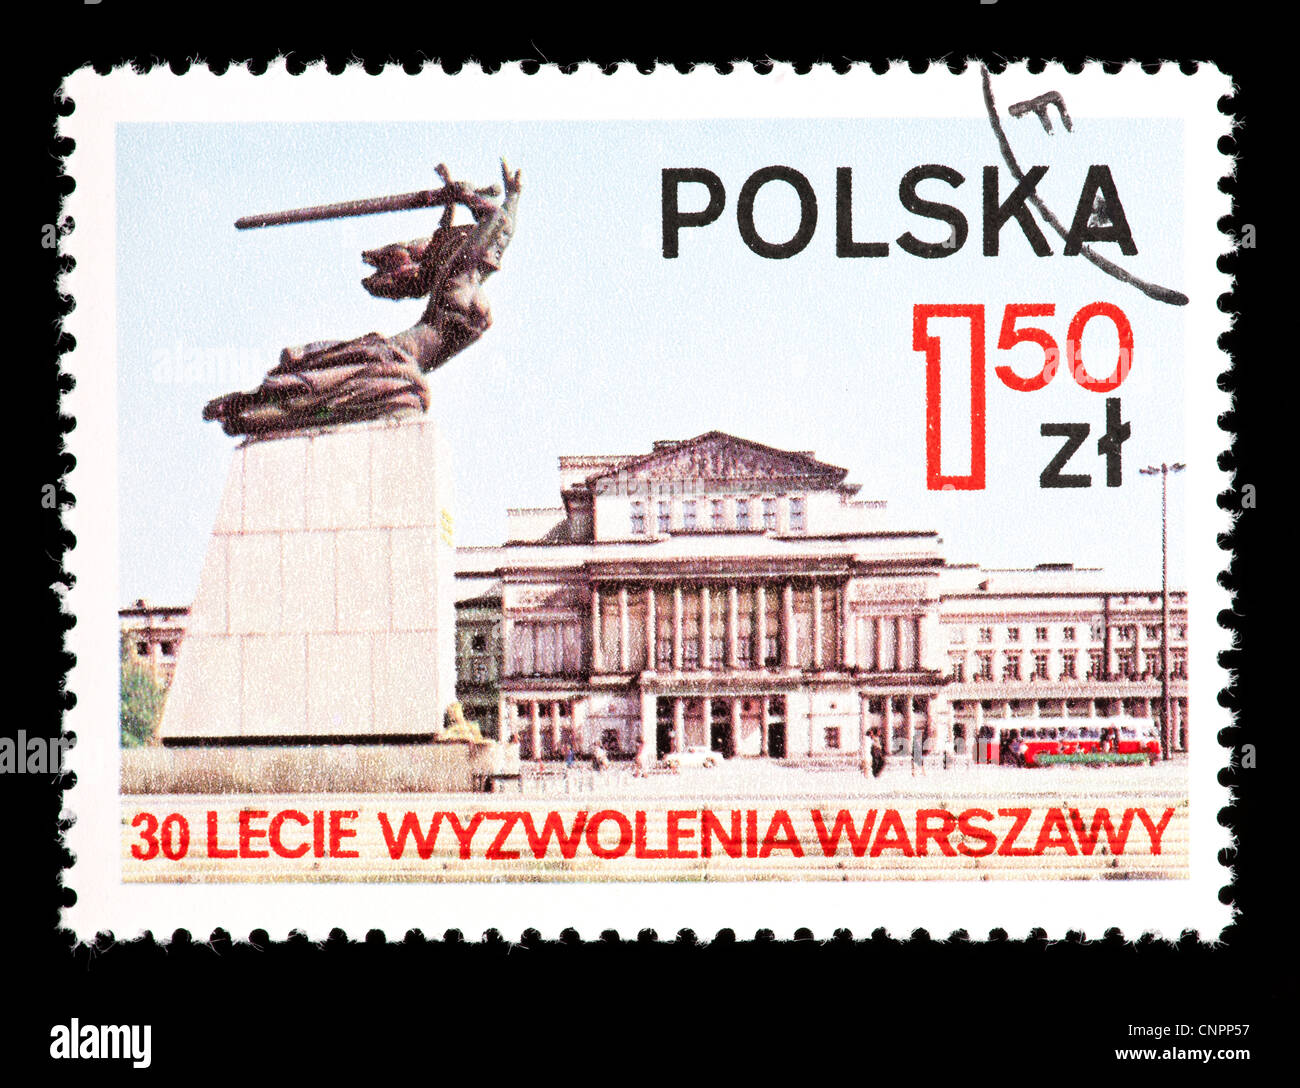 Postage stamp from Poland depicting a statue of Nike and the Warsaw Opera house Stock Photo